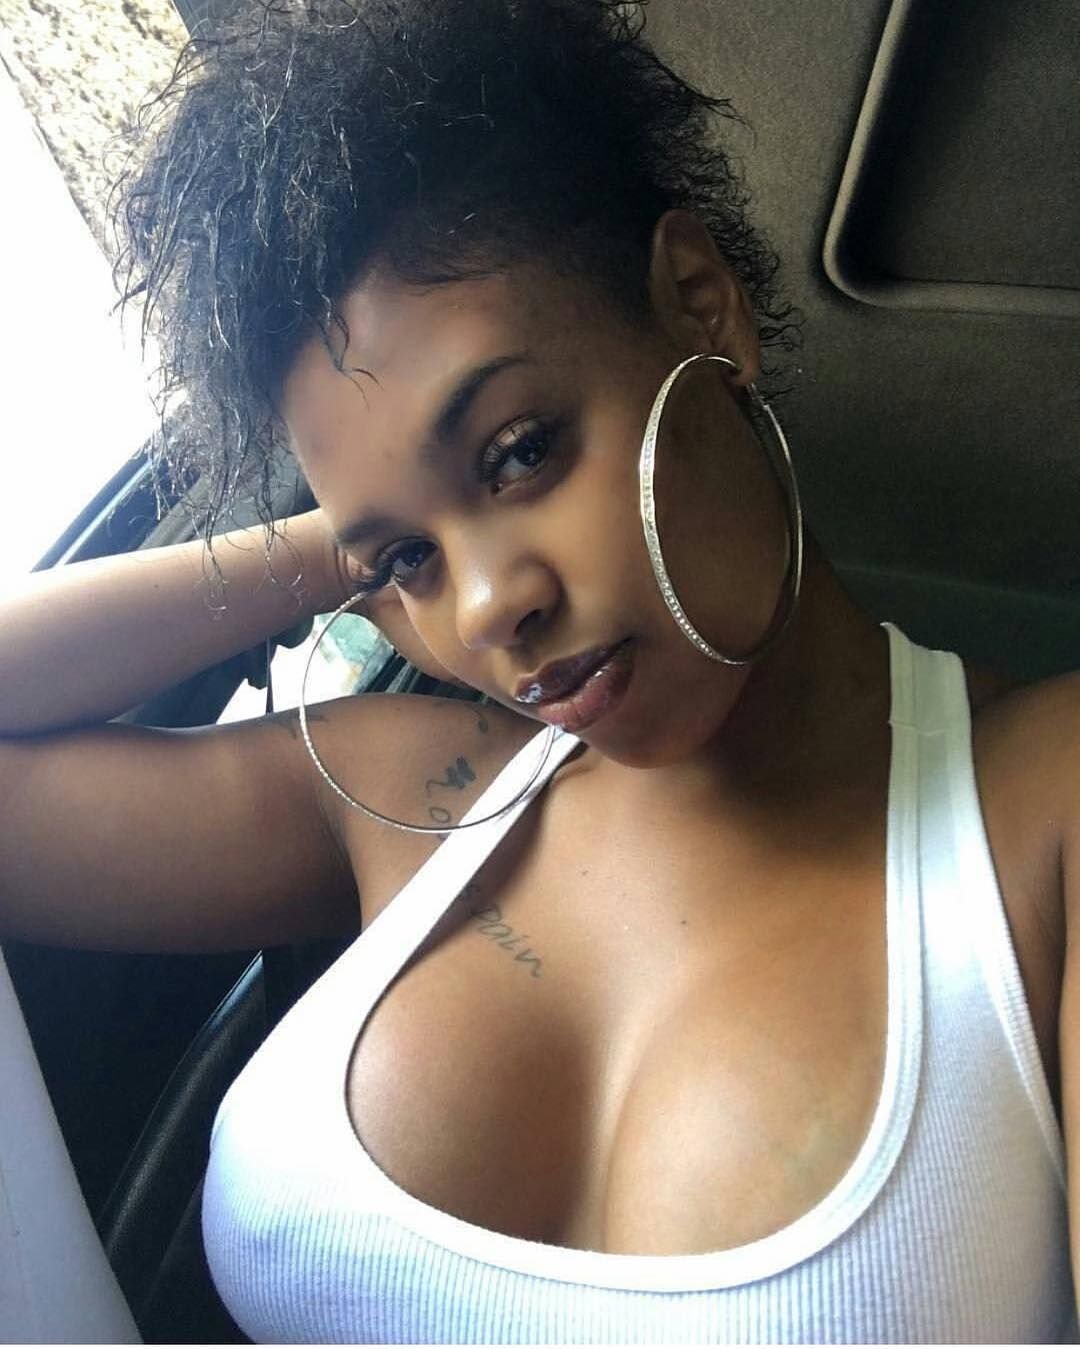 Breasted ebony will blow your fan photo